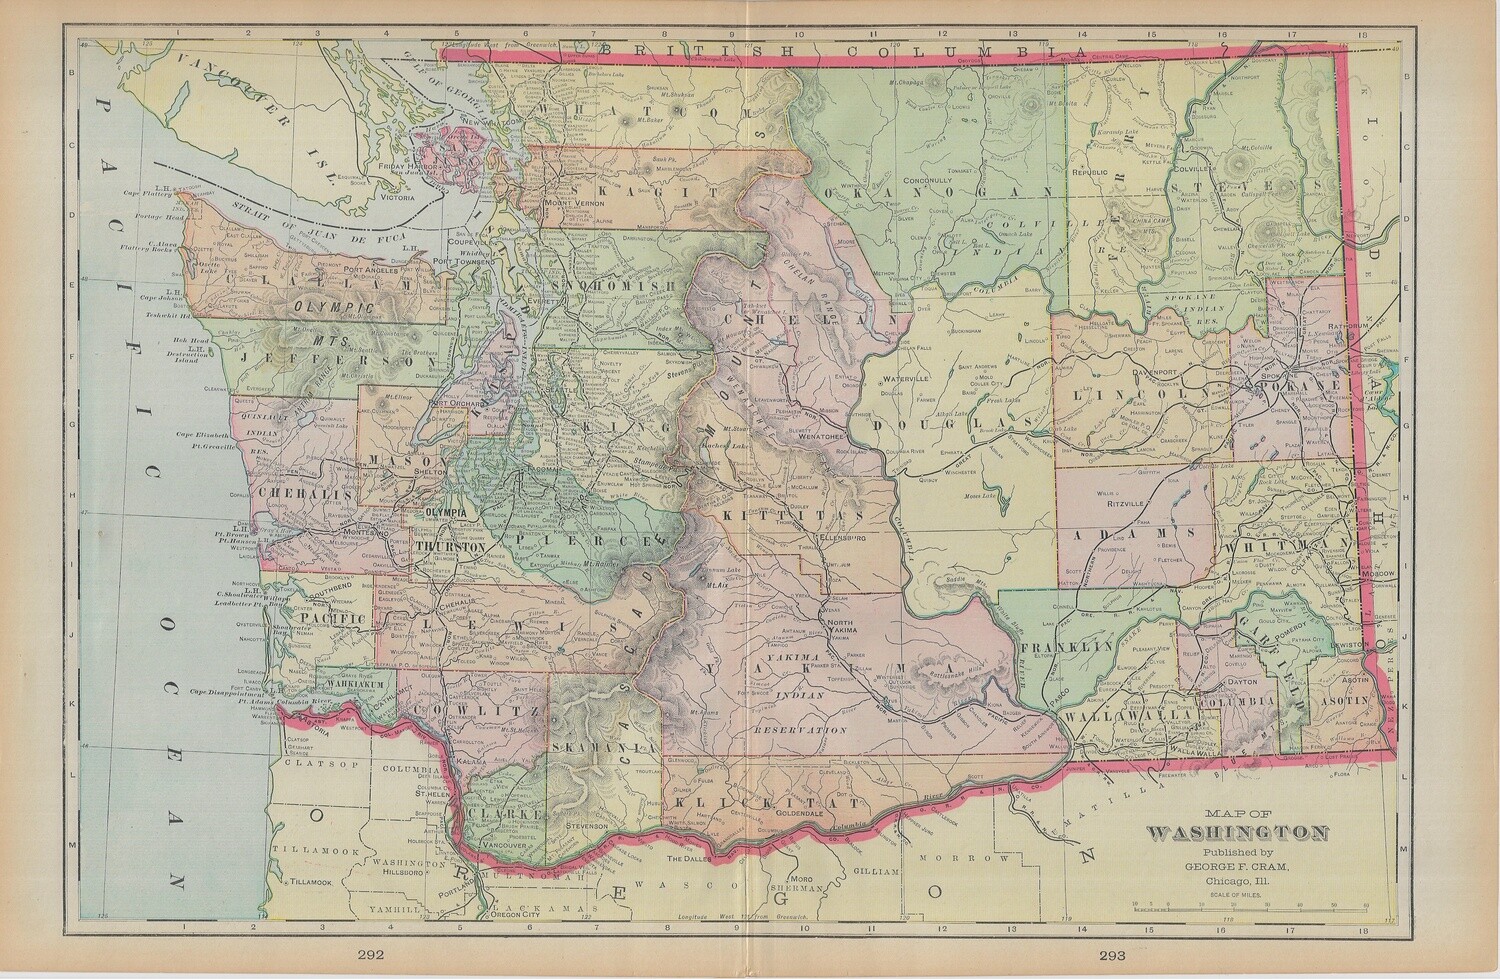 1903 Map of Washington State by Geo.Cram in Color Lithography